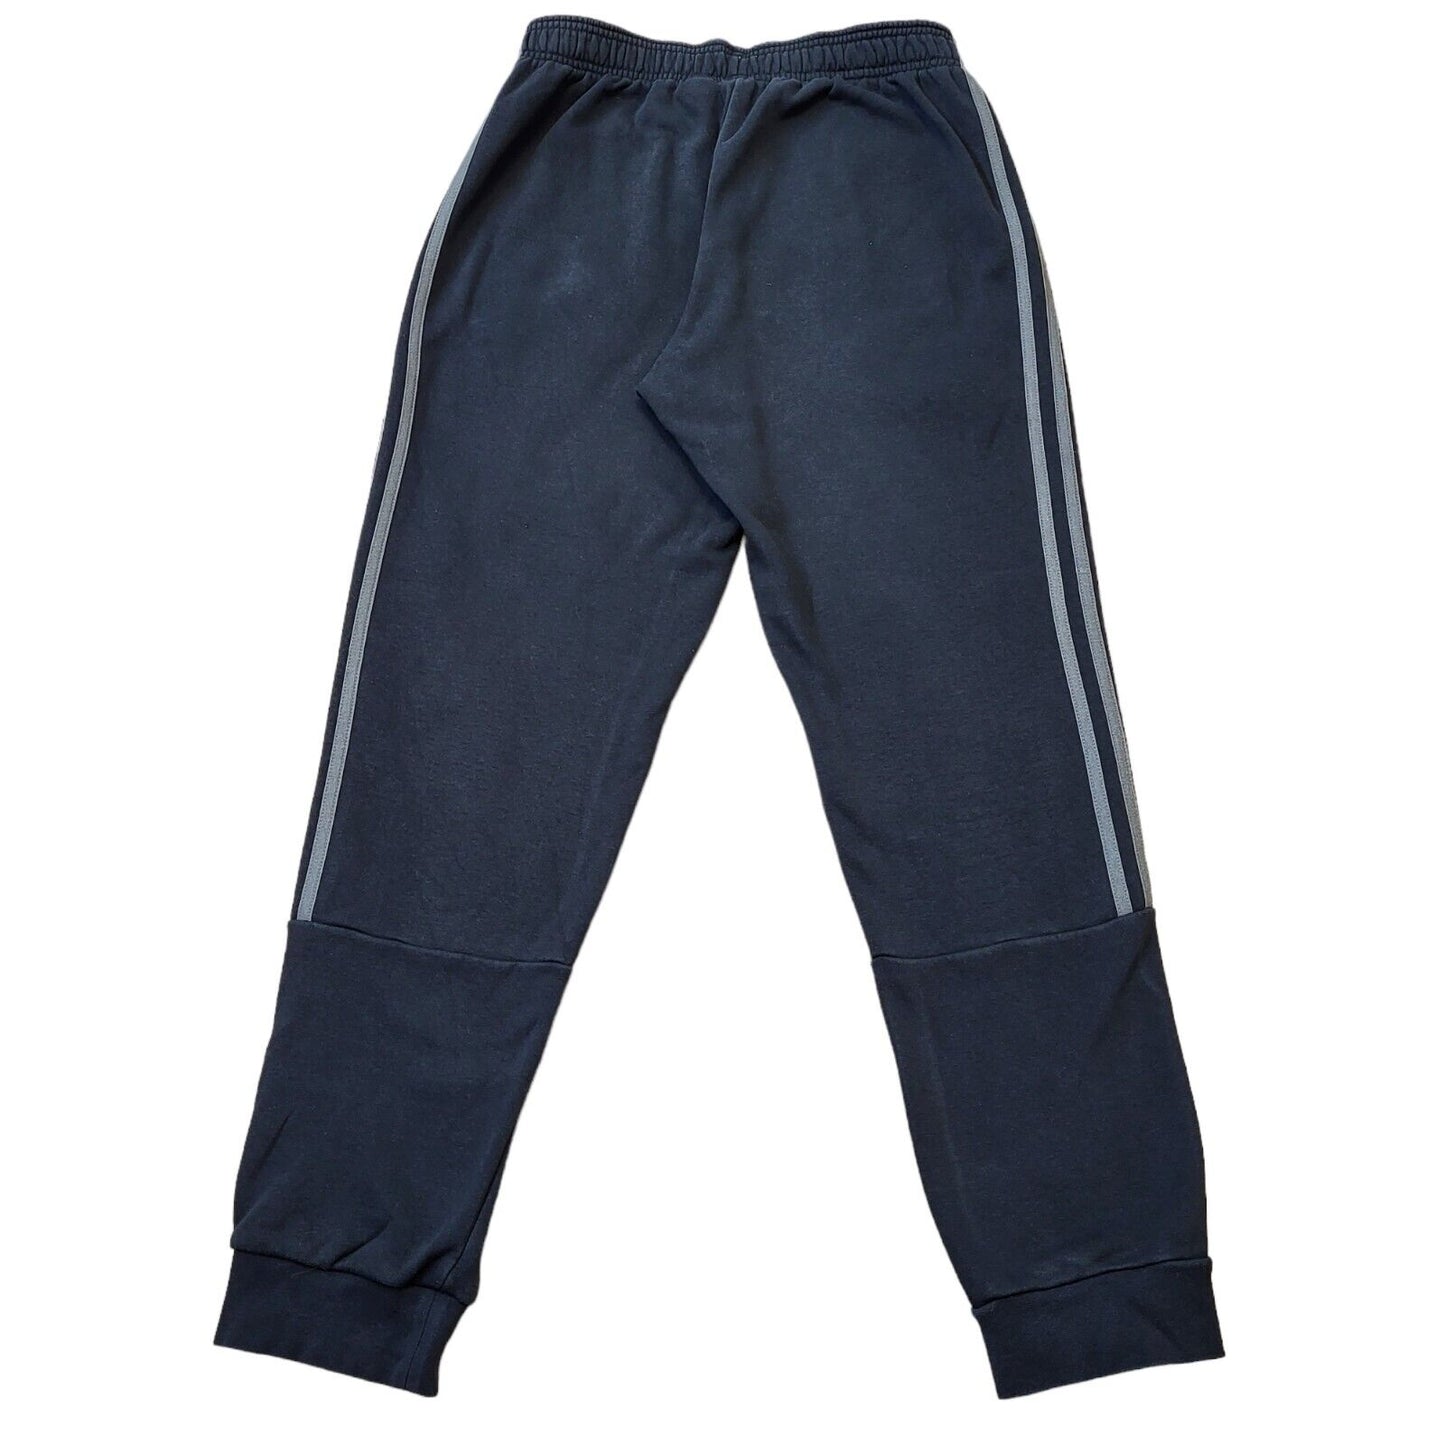 Adidas Trousers (M)